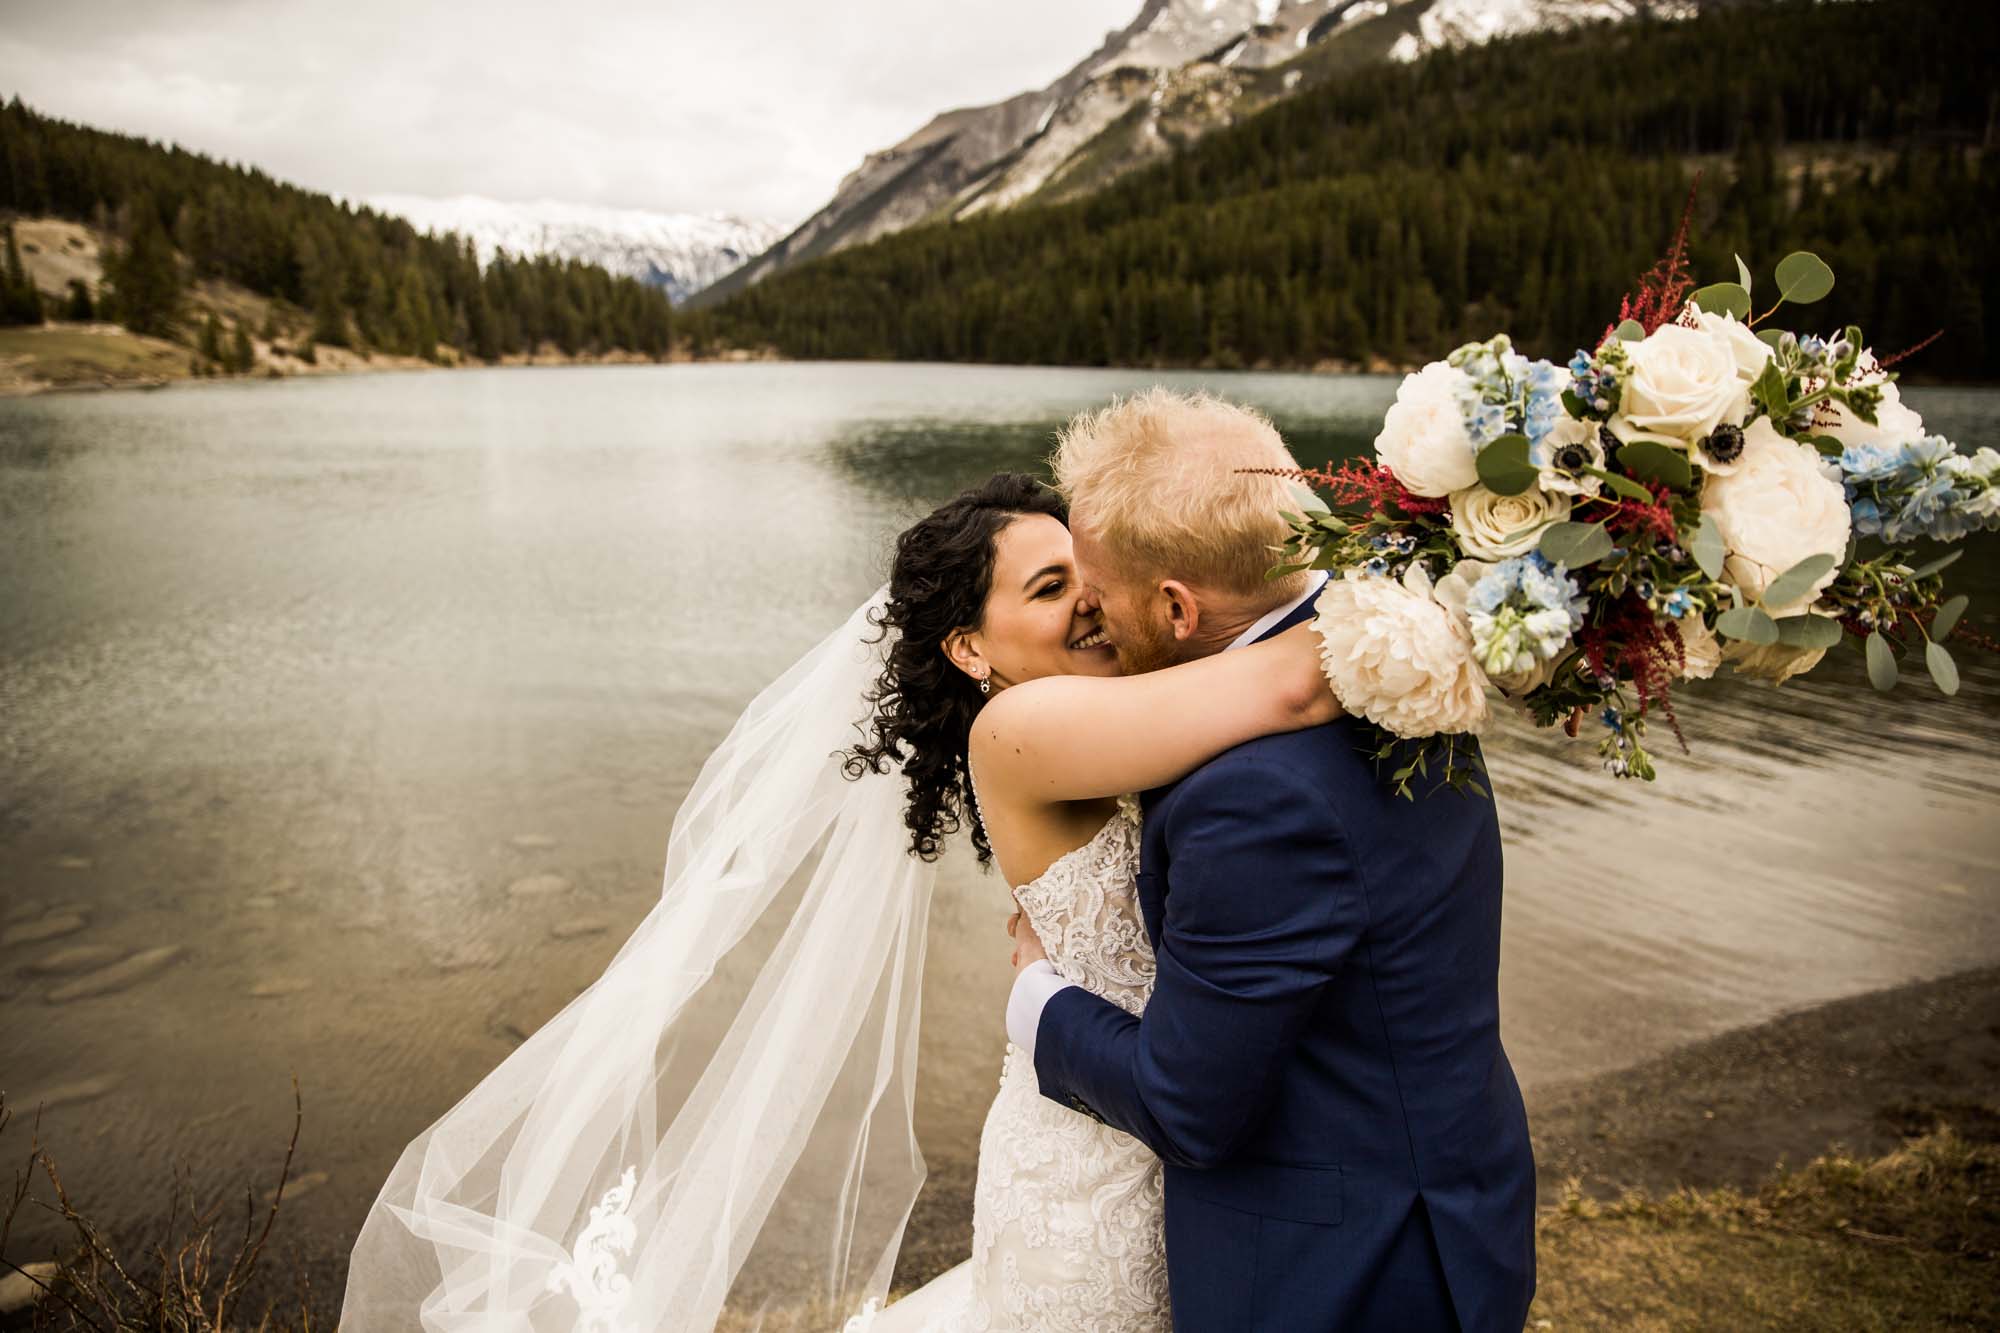 Banff wedding photographer, a couple on their wedding day at the Rimrock, St Mary's Parish in Banff National Park